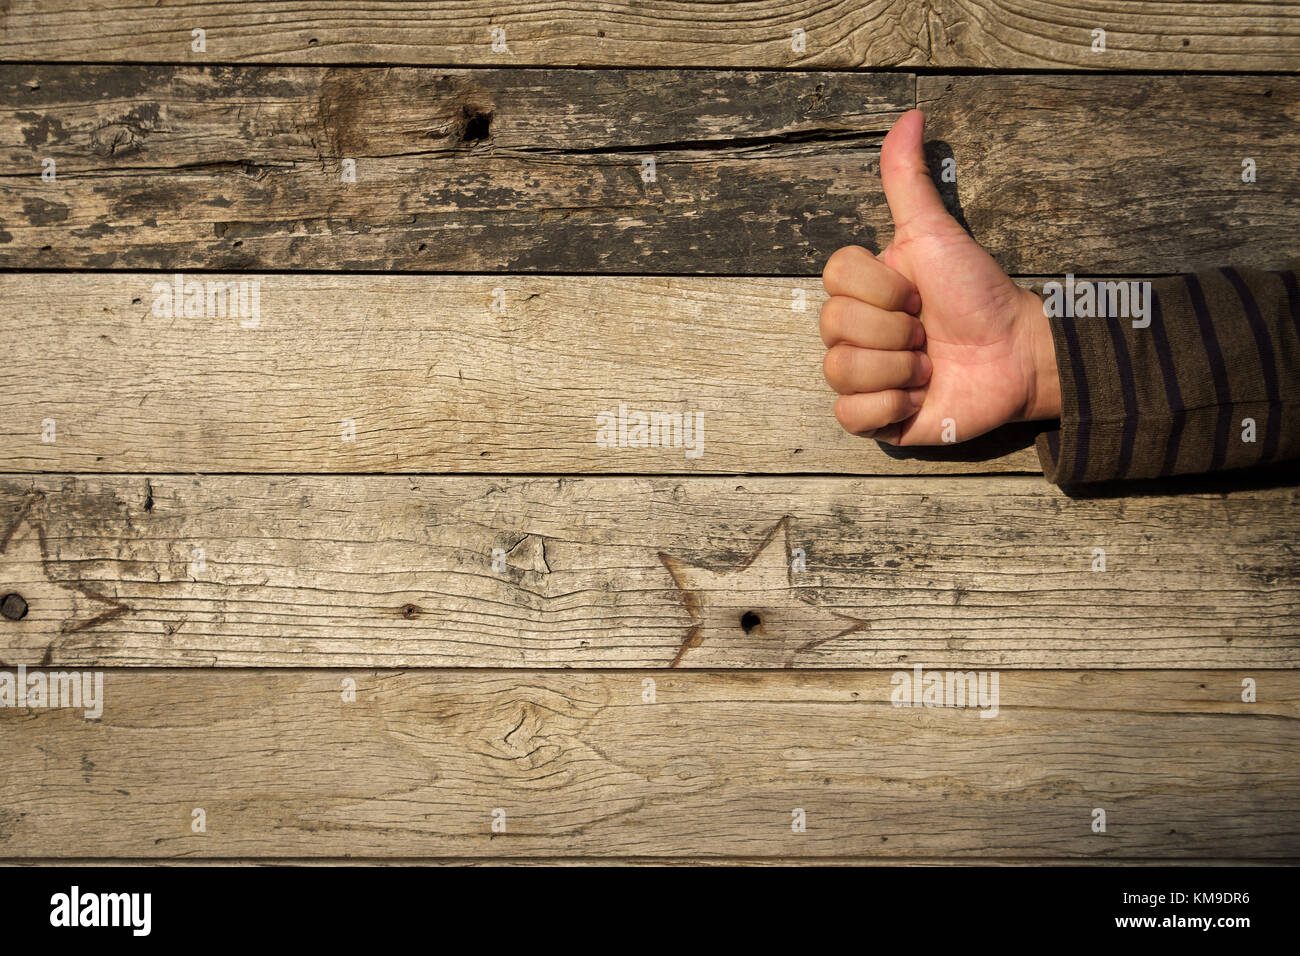 Thumbs up on a Rustic weathered barn wood background Stock Photo